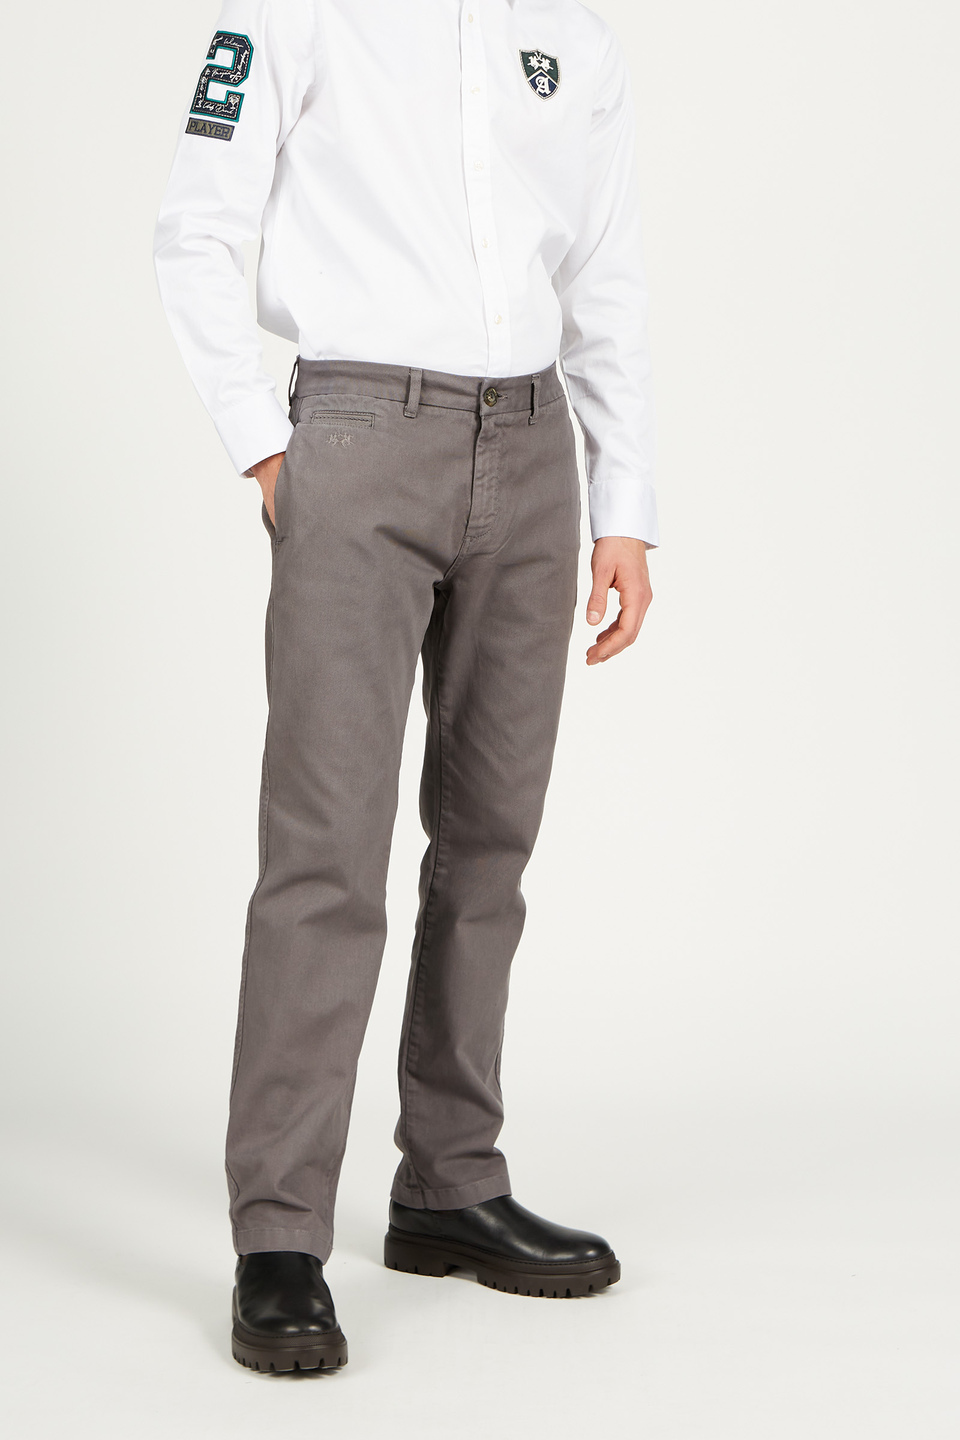 Men’s trousers in cotton regular fit chino model - La Martina - Official Online Shop